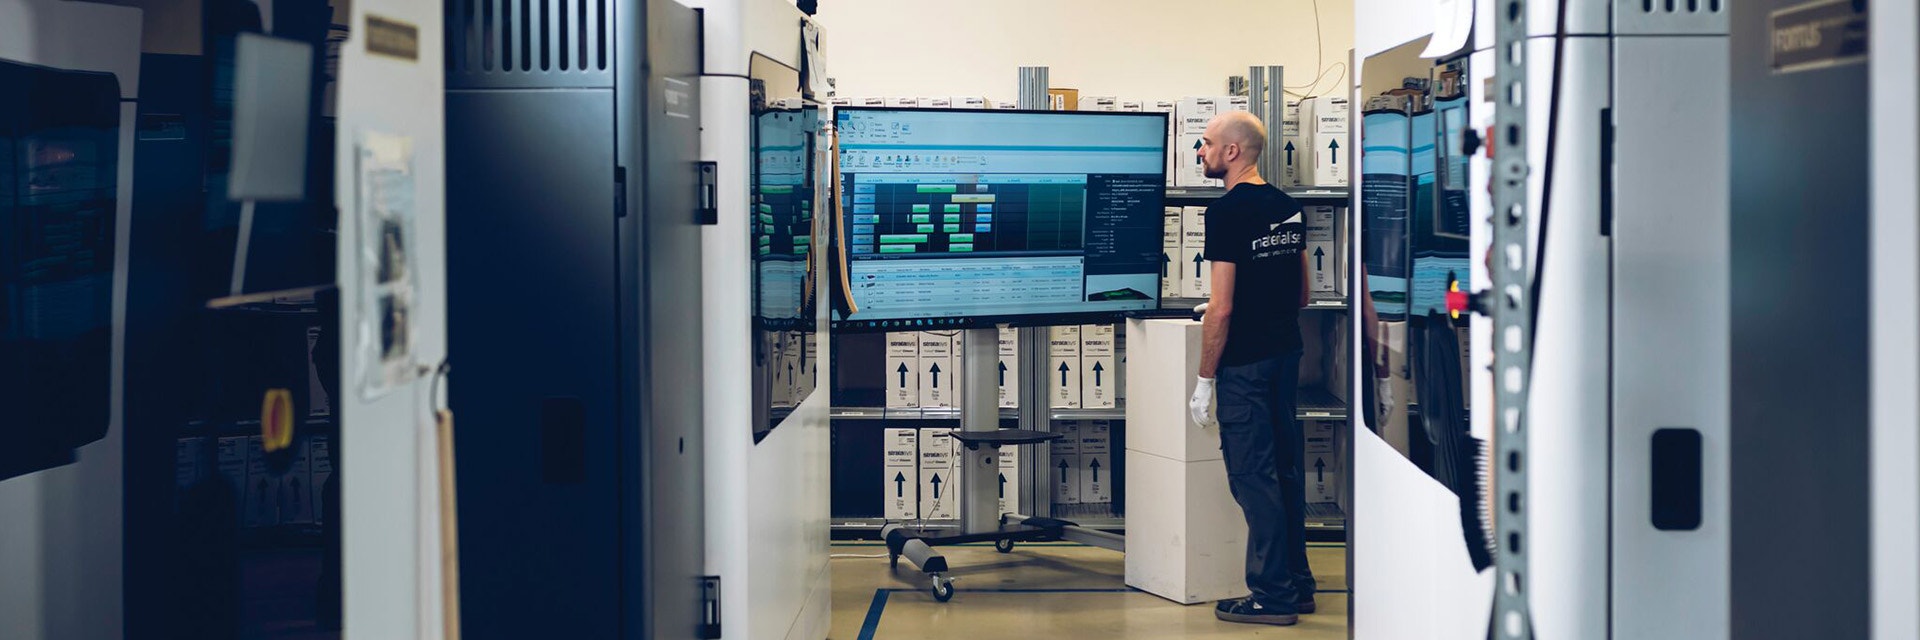 Man looking at a large monitor in 3D printing production